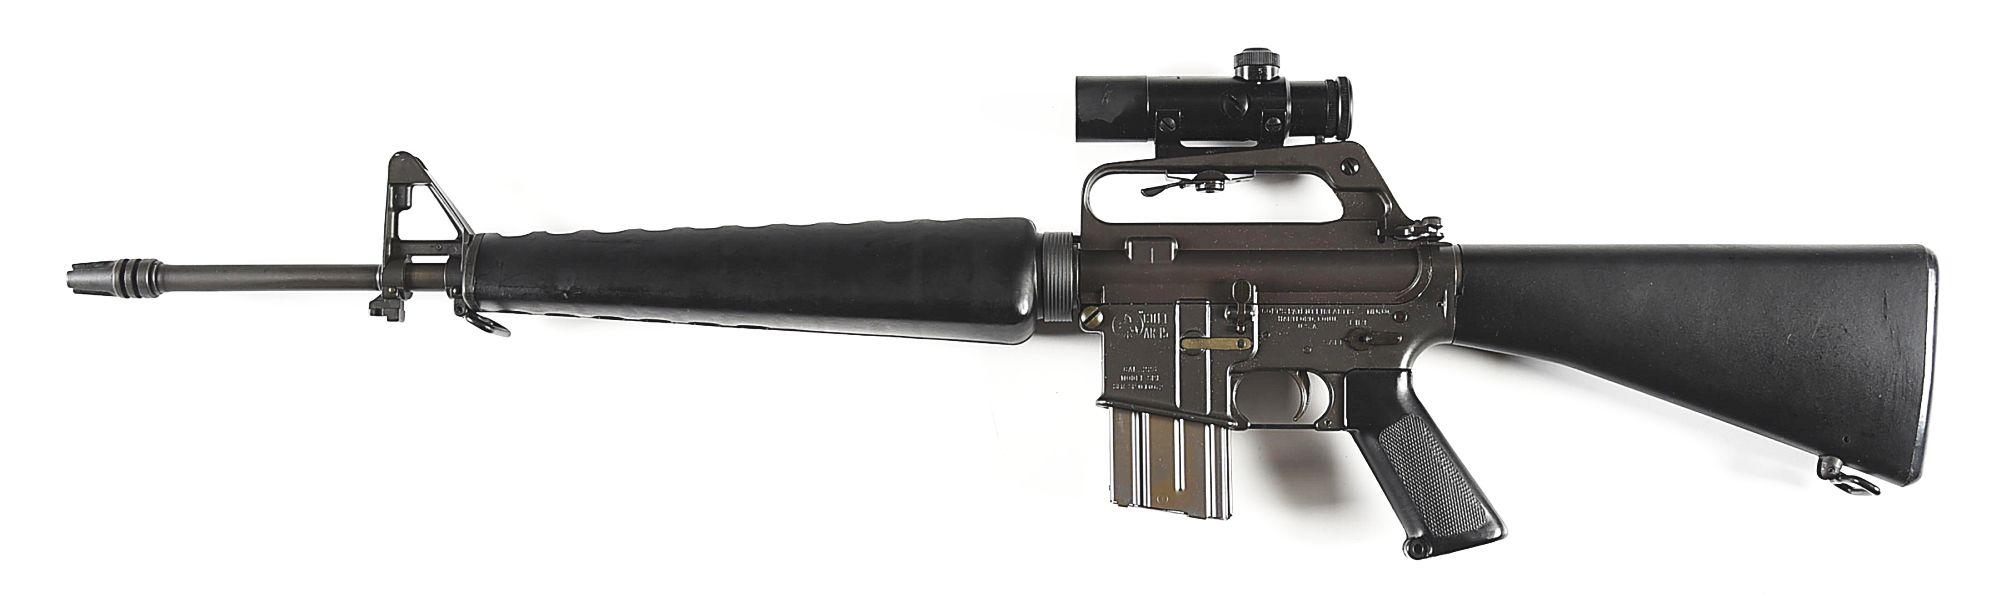 (C) EARLY PRODUCTION 1964 COLT SP1 AR-15 SEMI AUTOMATIC RIFLE WITH PERIOD ACCESSORIES.